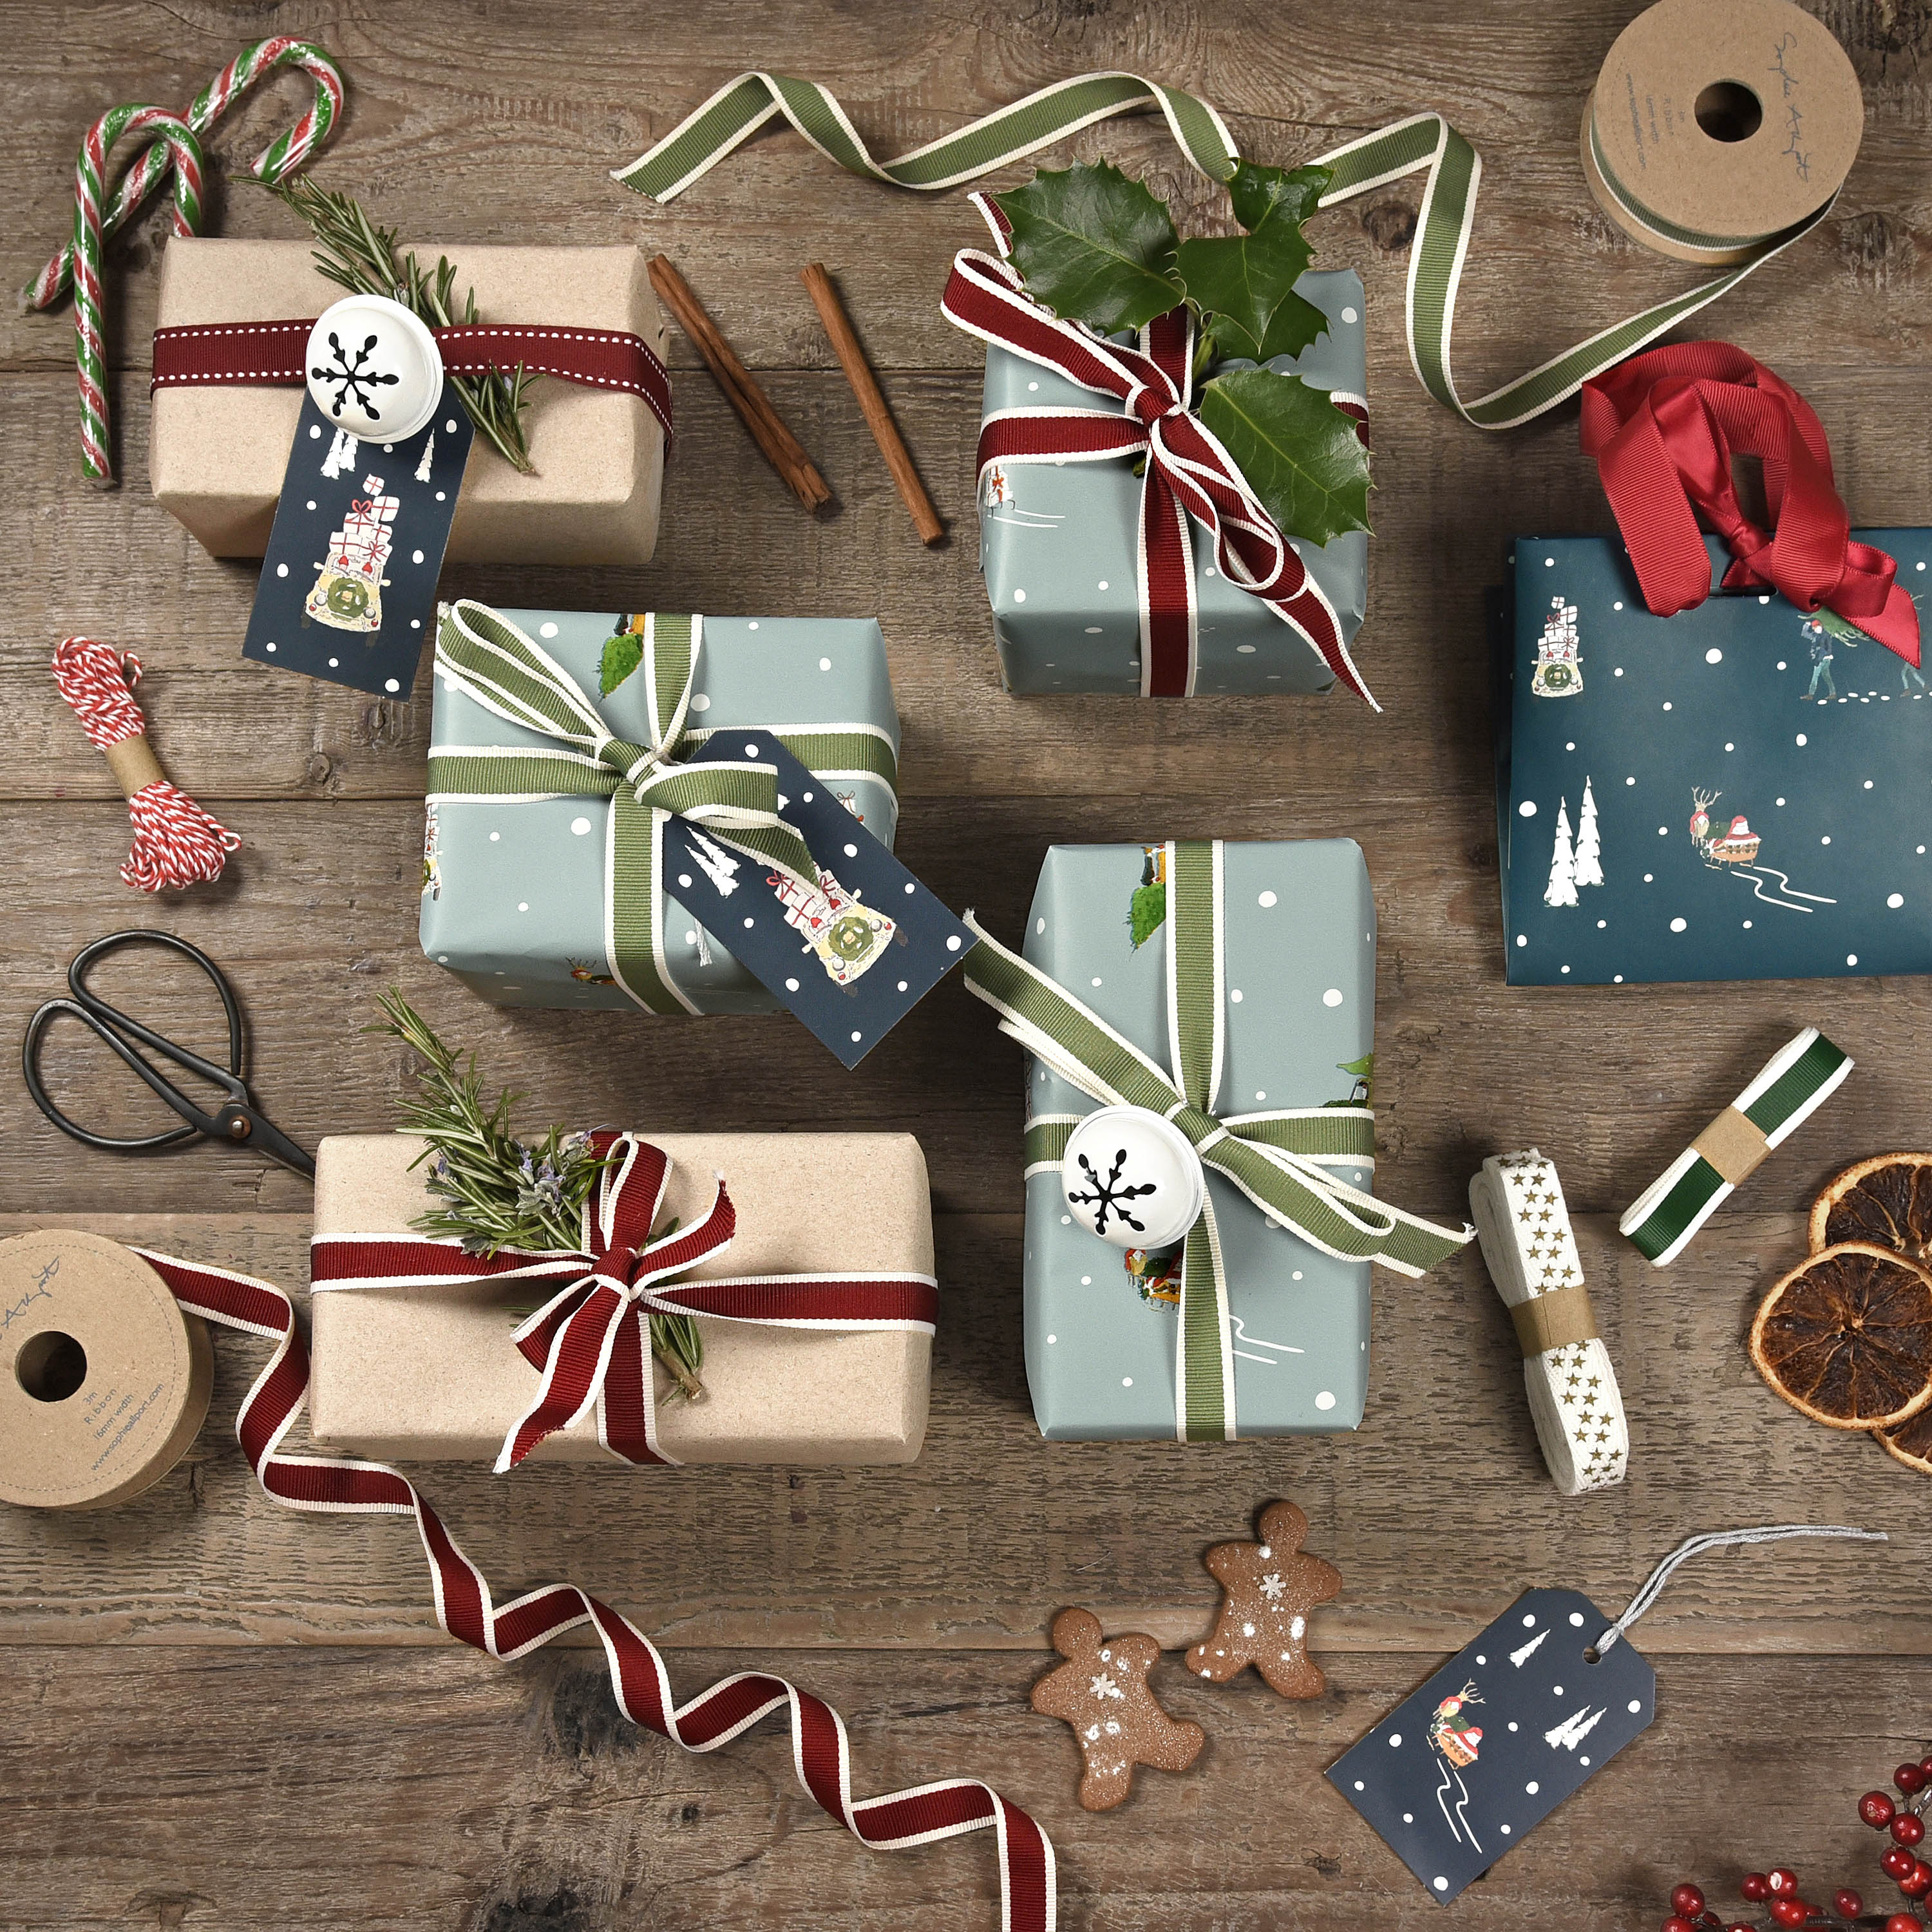 Gift Wrapping Tips 2020 by Sophie Allport